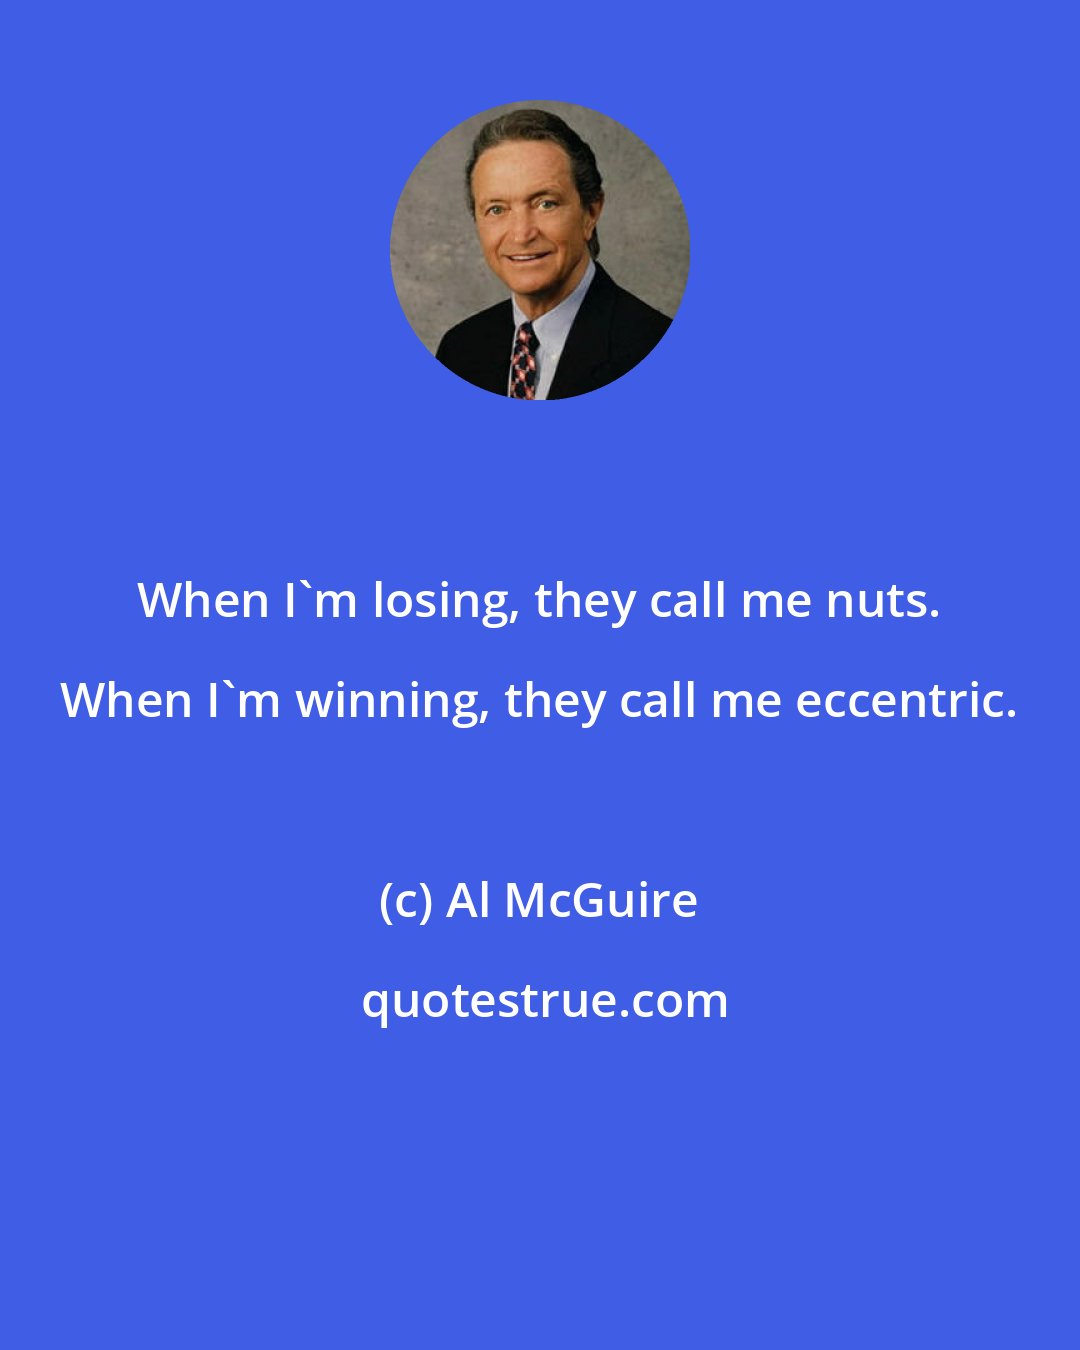 Al McGuire: When I'm losing, they call me nuts. When I'm winning, they call me eccentric.